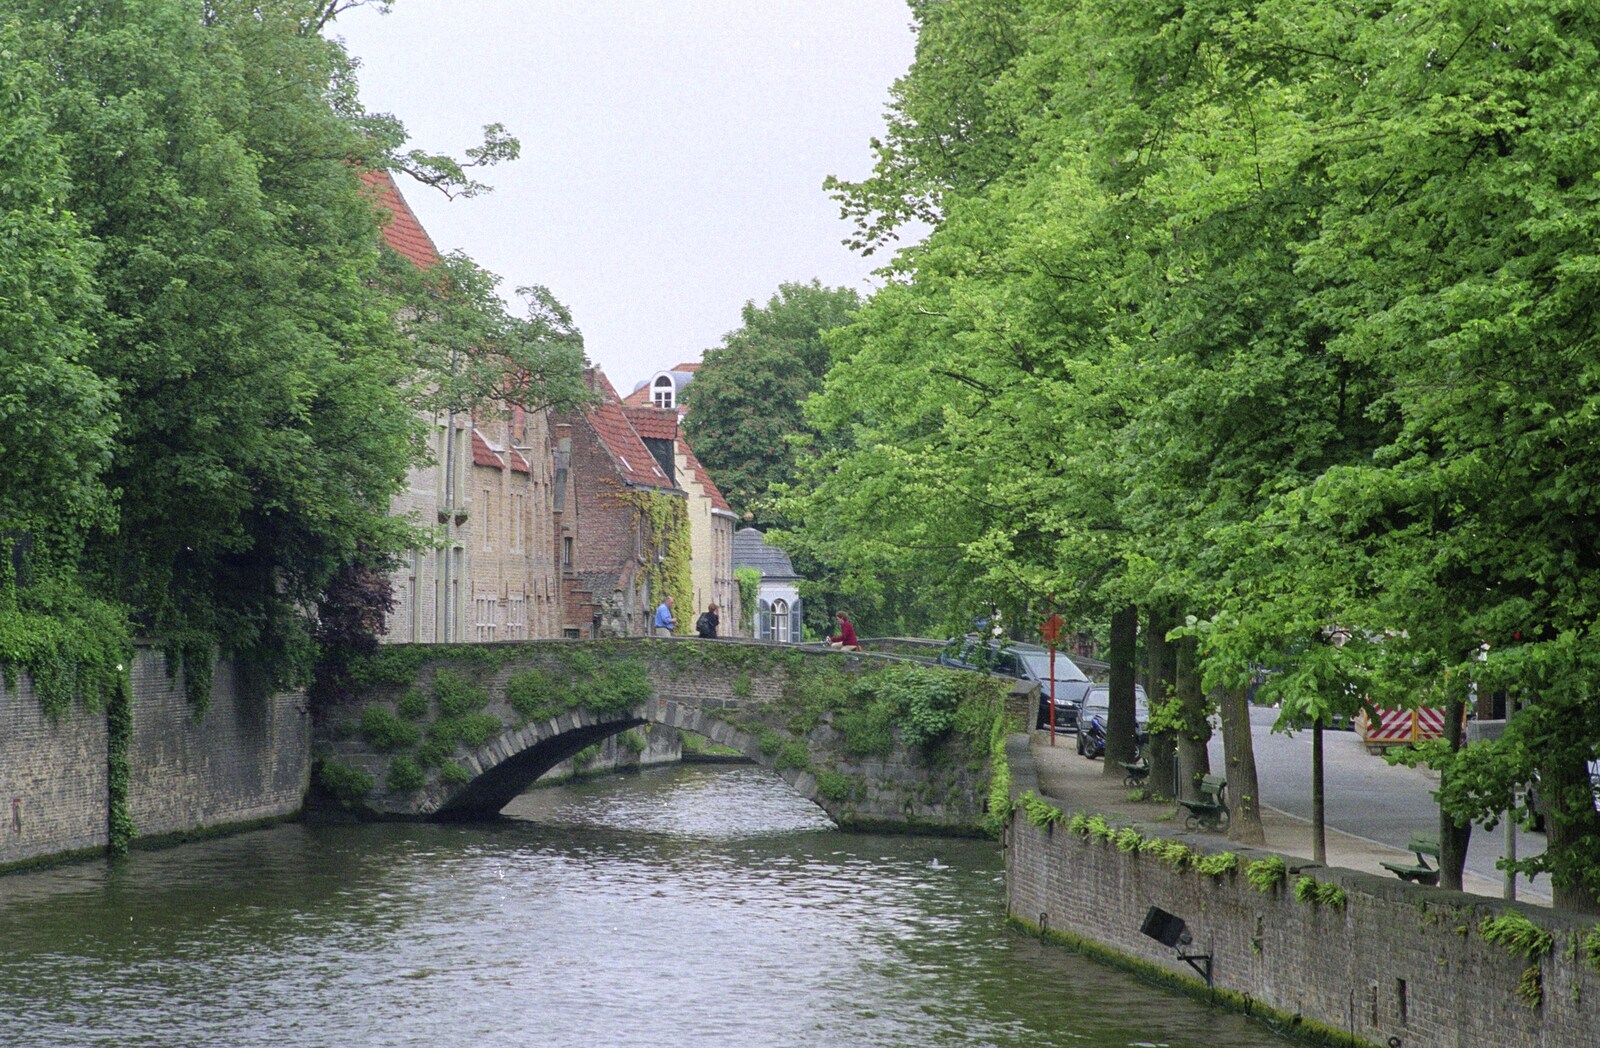 Peaceful river scene from CISU: An SCC Day-Trip to Bruges, Belgium - 26th May 2000